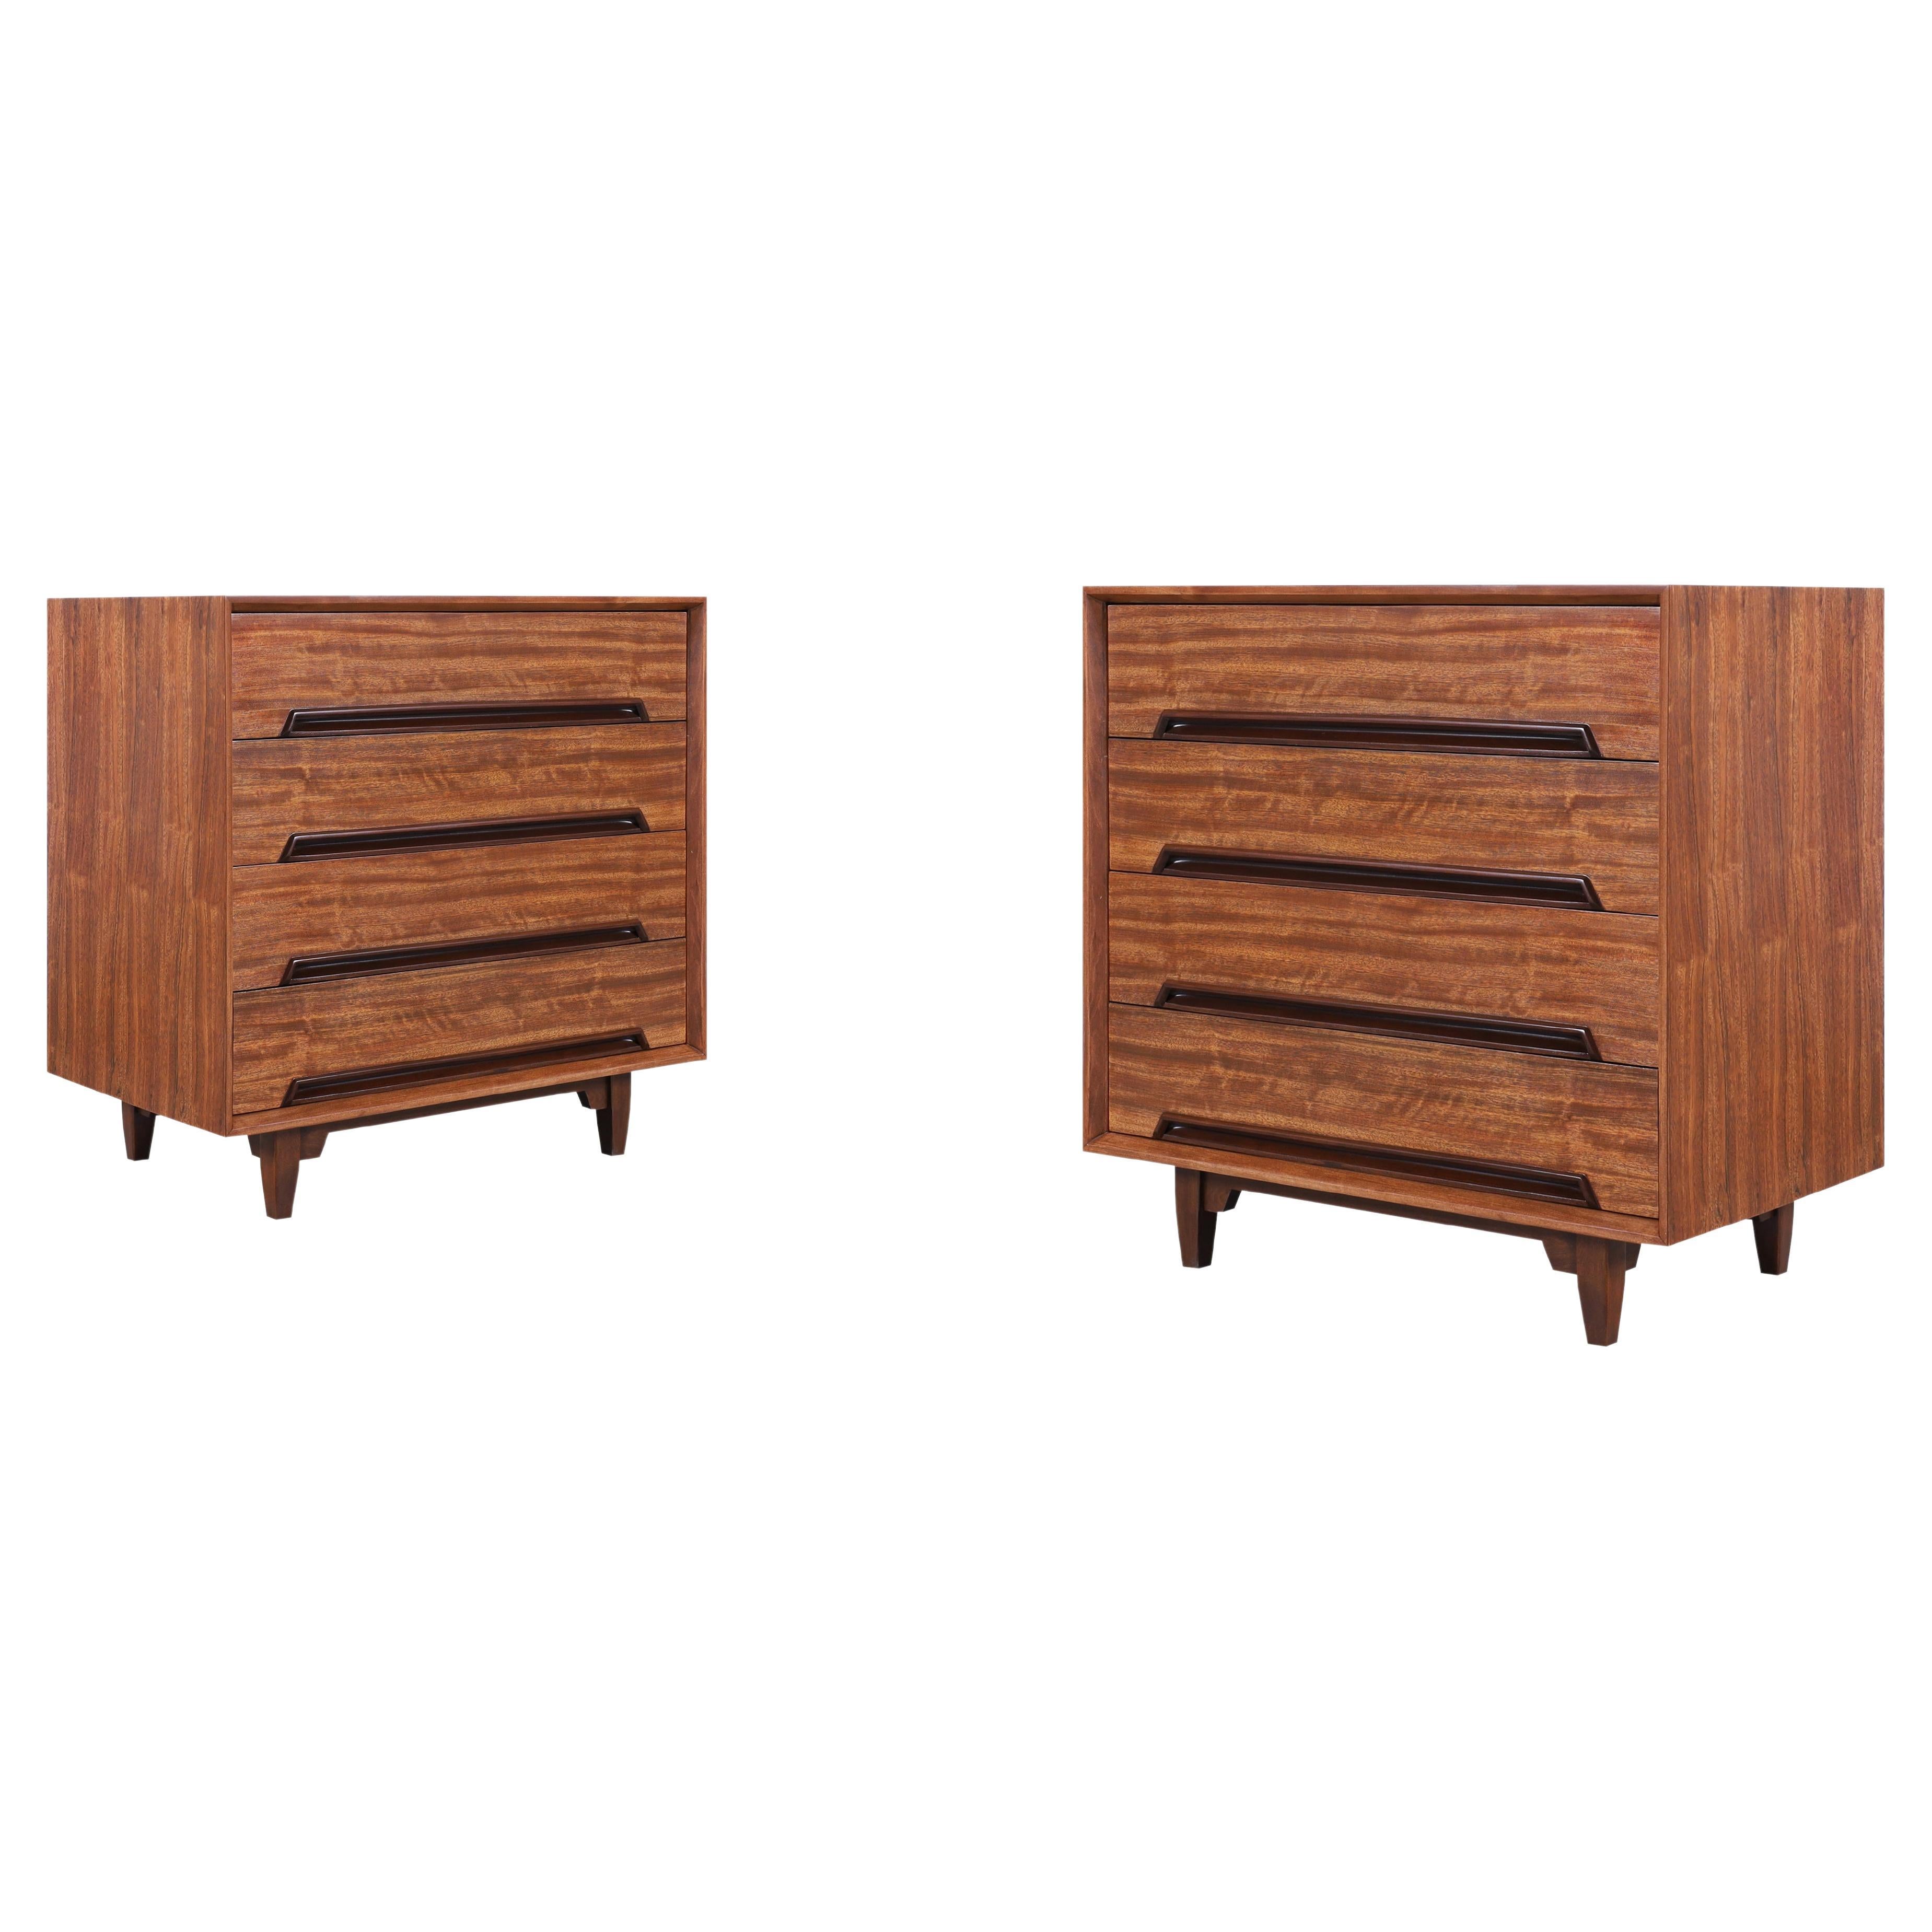 Vintage "Perspective" Chest of Drawers by Milo Baughman for Drexel